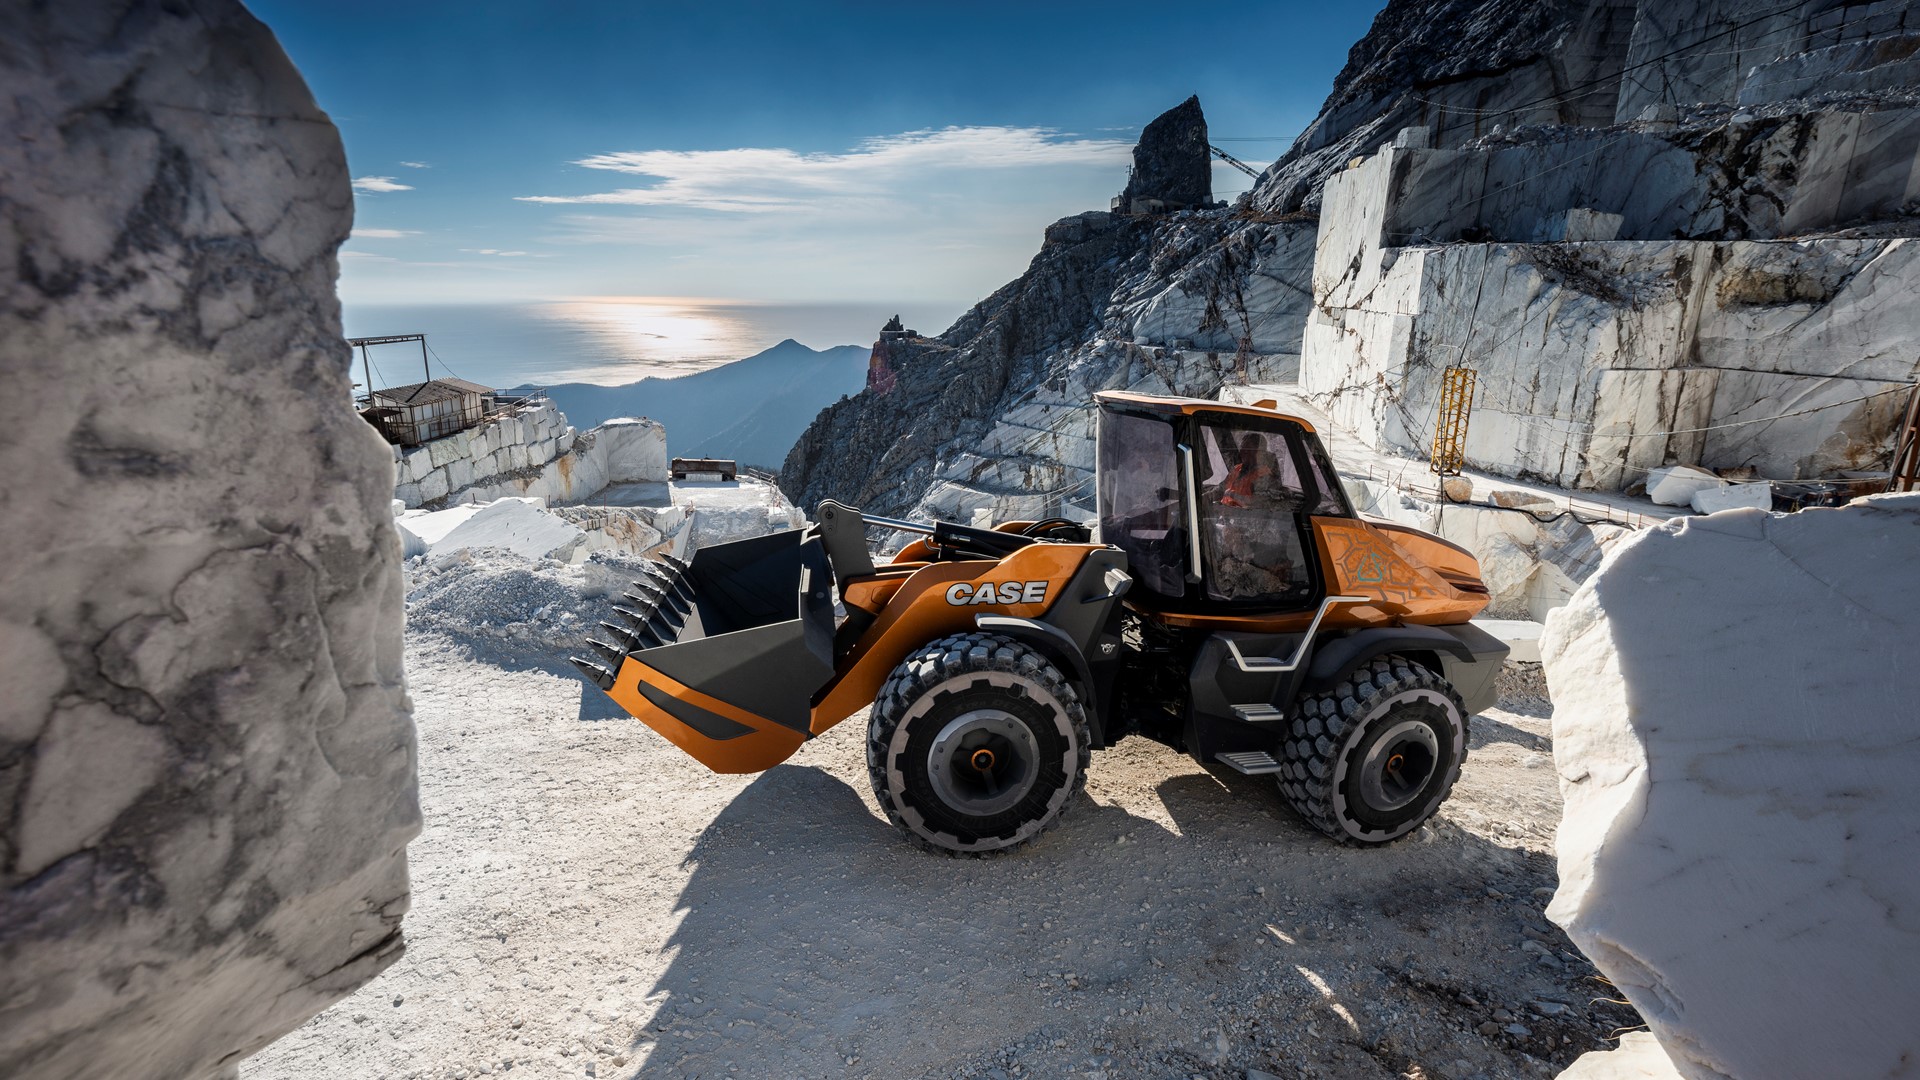 The CASE methane powered concept wheel loader delivers oustanding productivity in a sustainable package